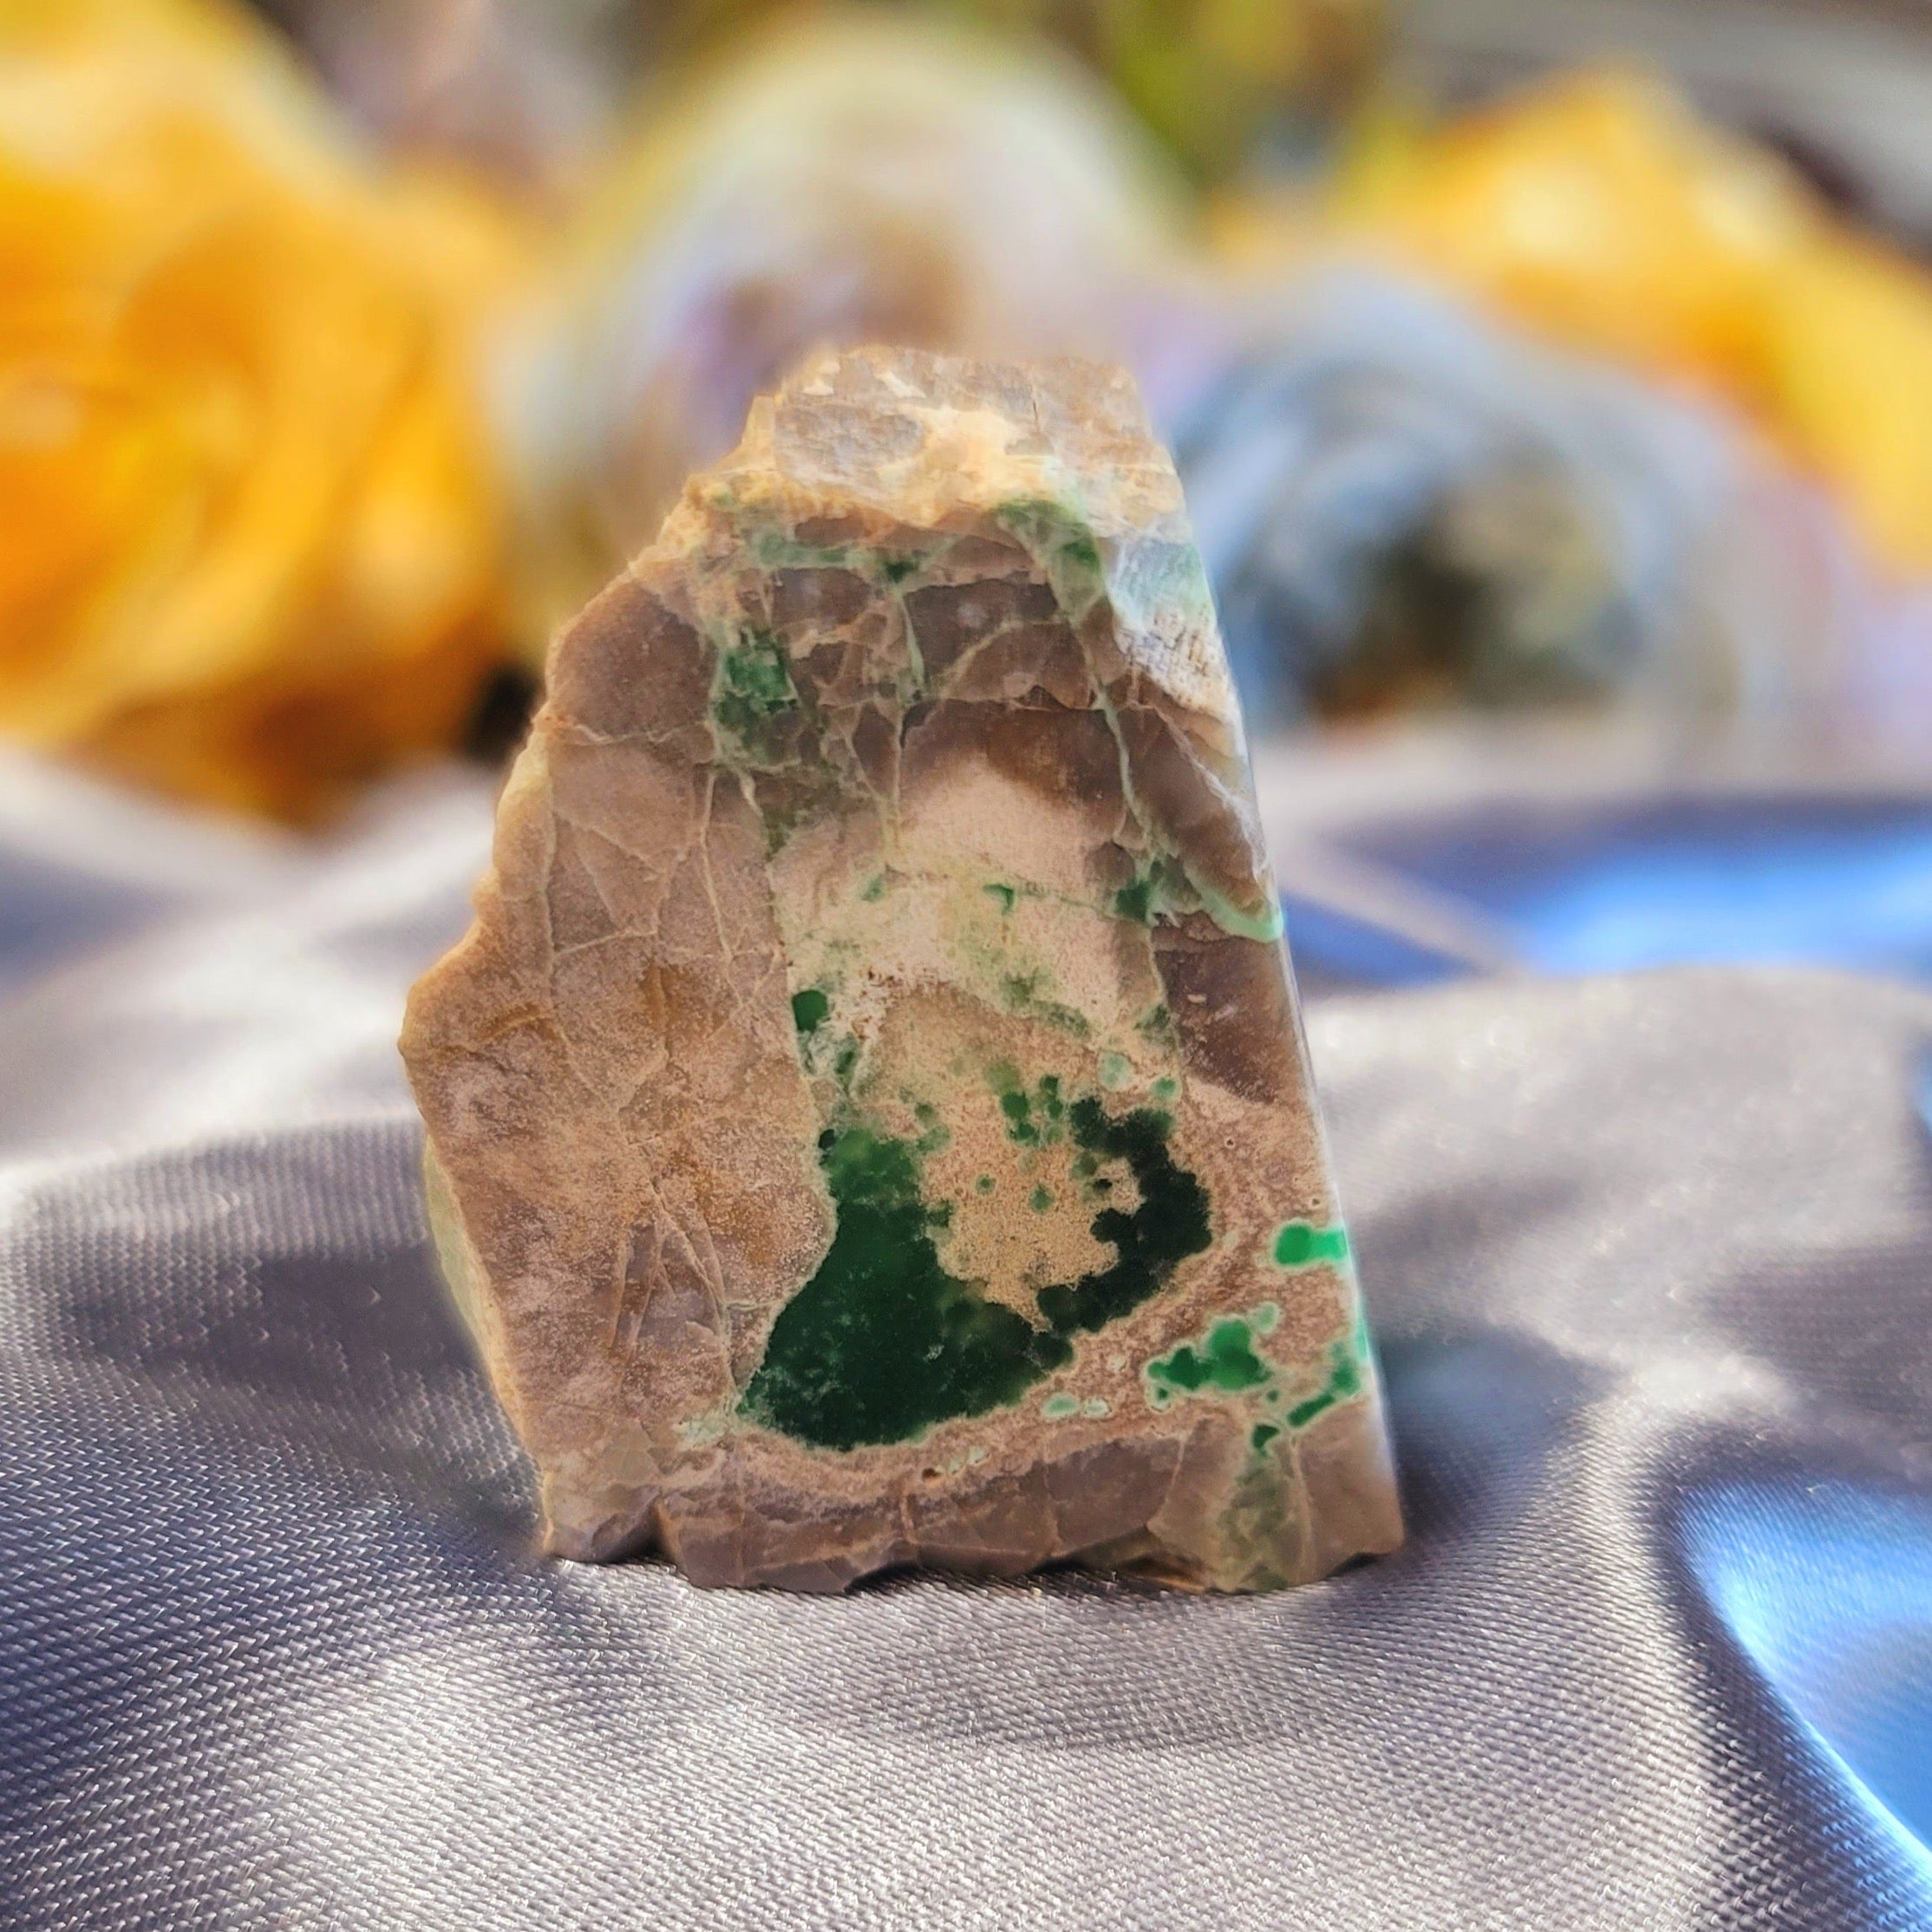 Lucin Variscite Free Form for Emotional Healing, Joy, Love and Prosperity